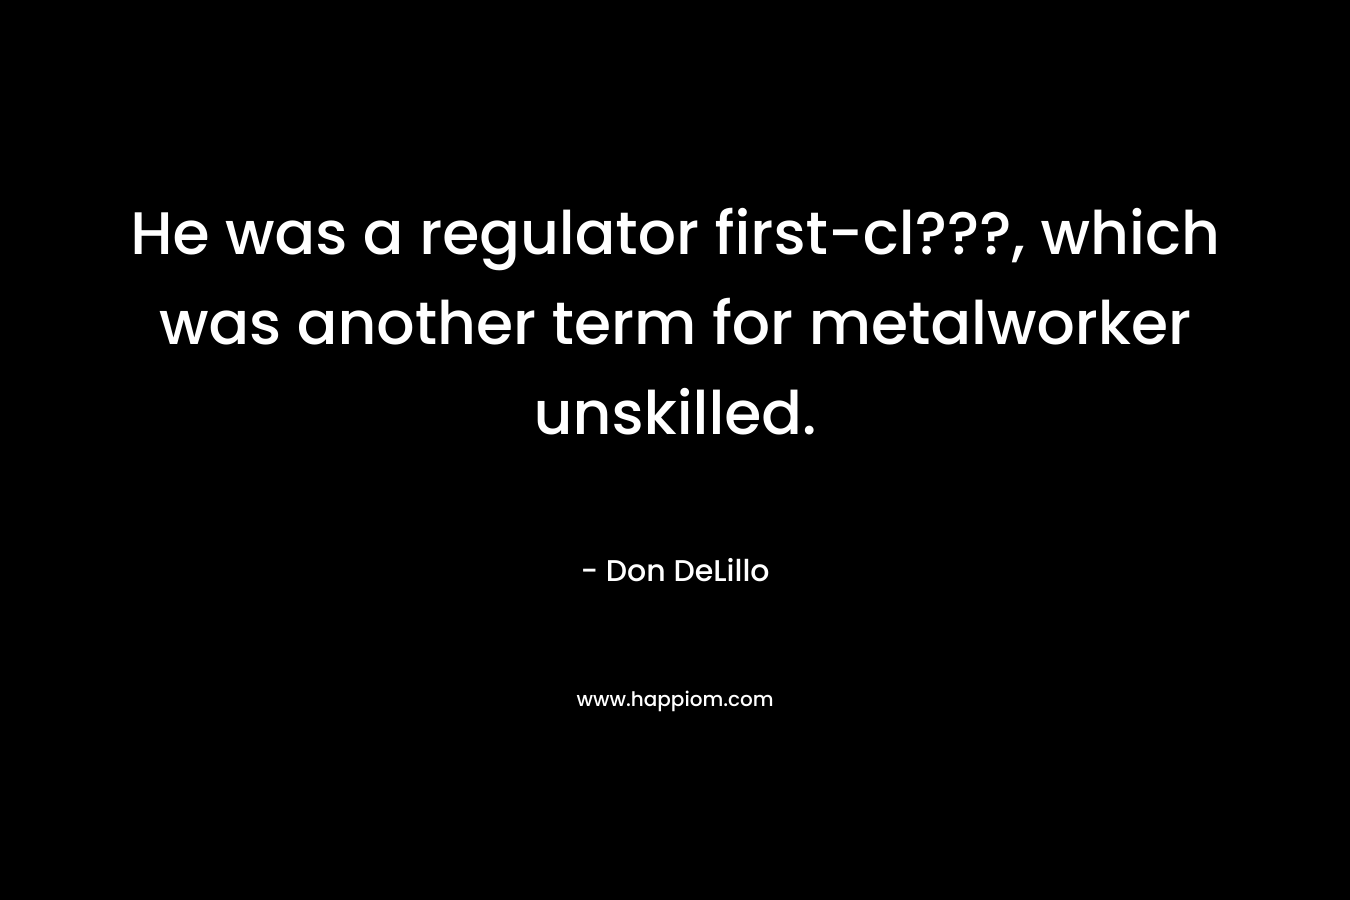 He was a regulator first-cl???, which was another term for metalworker unskilled. – Don DeLillo